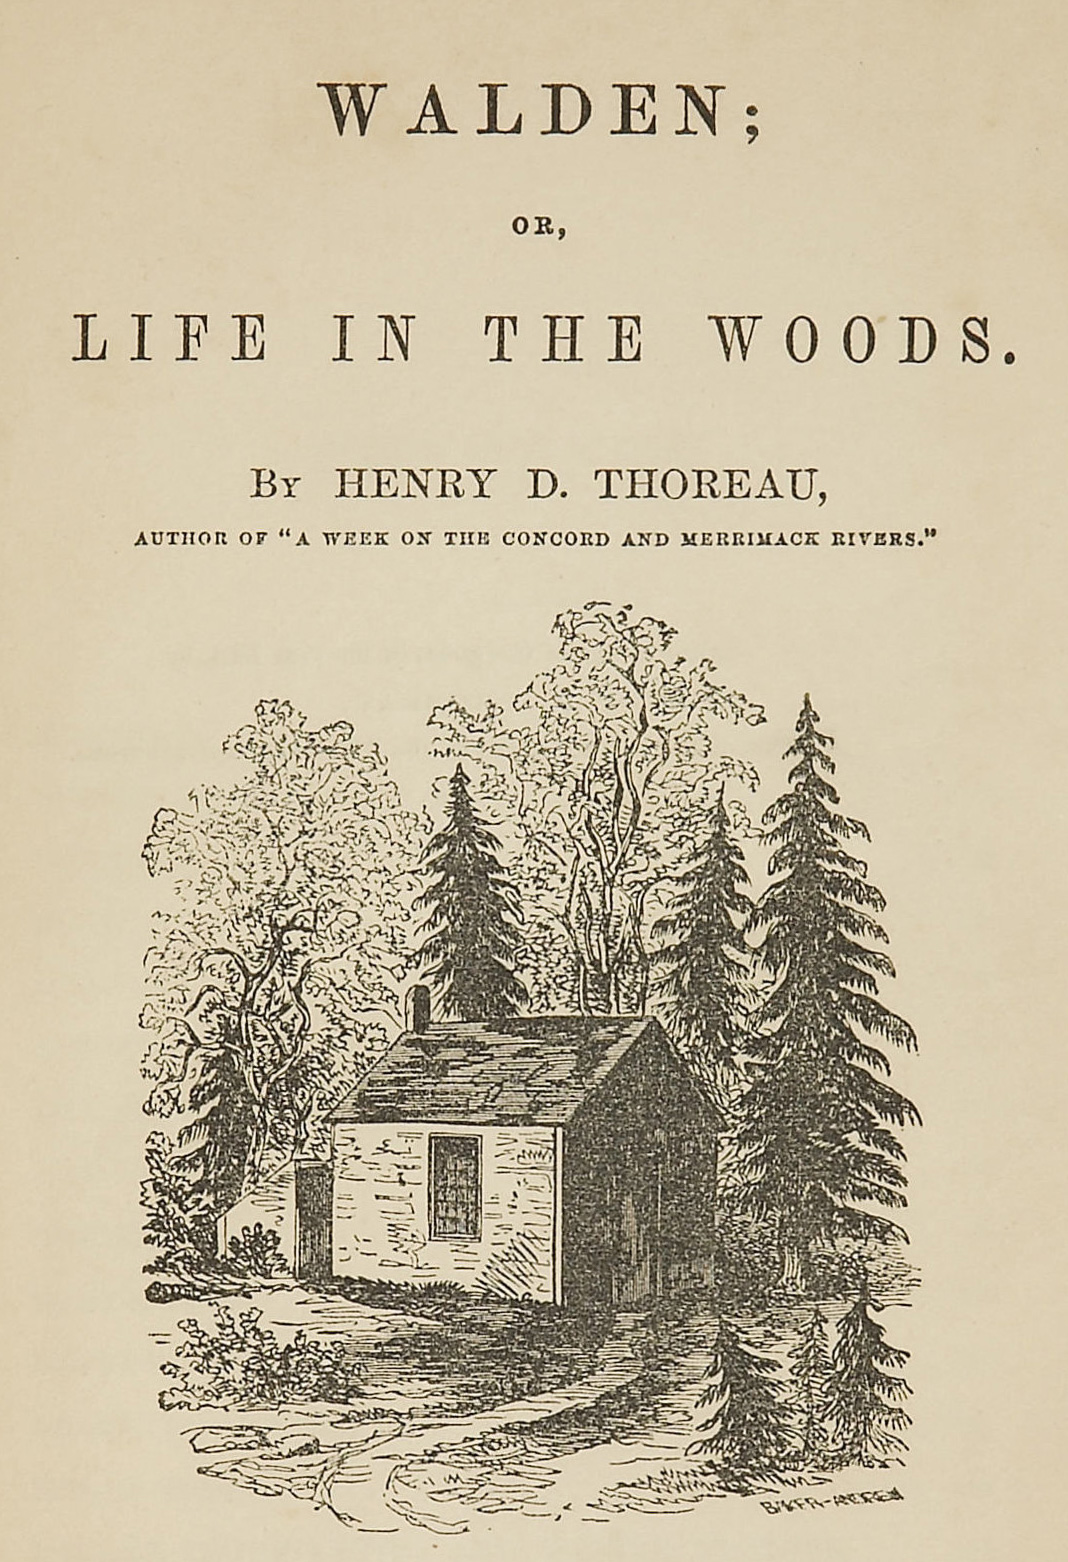 The Project Gutenberg eBook of Walden, by Henry David Thoreau